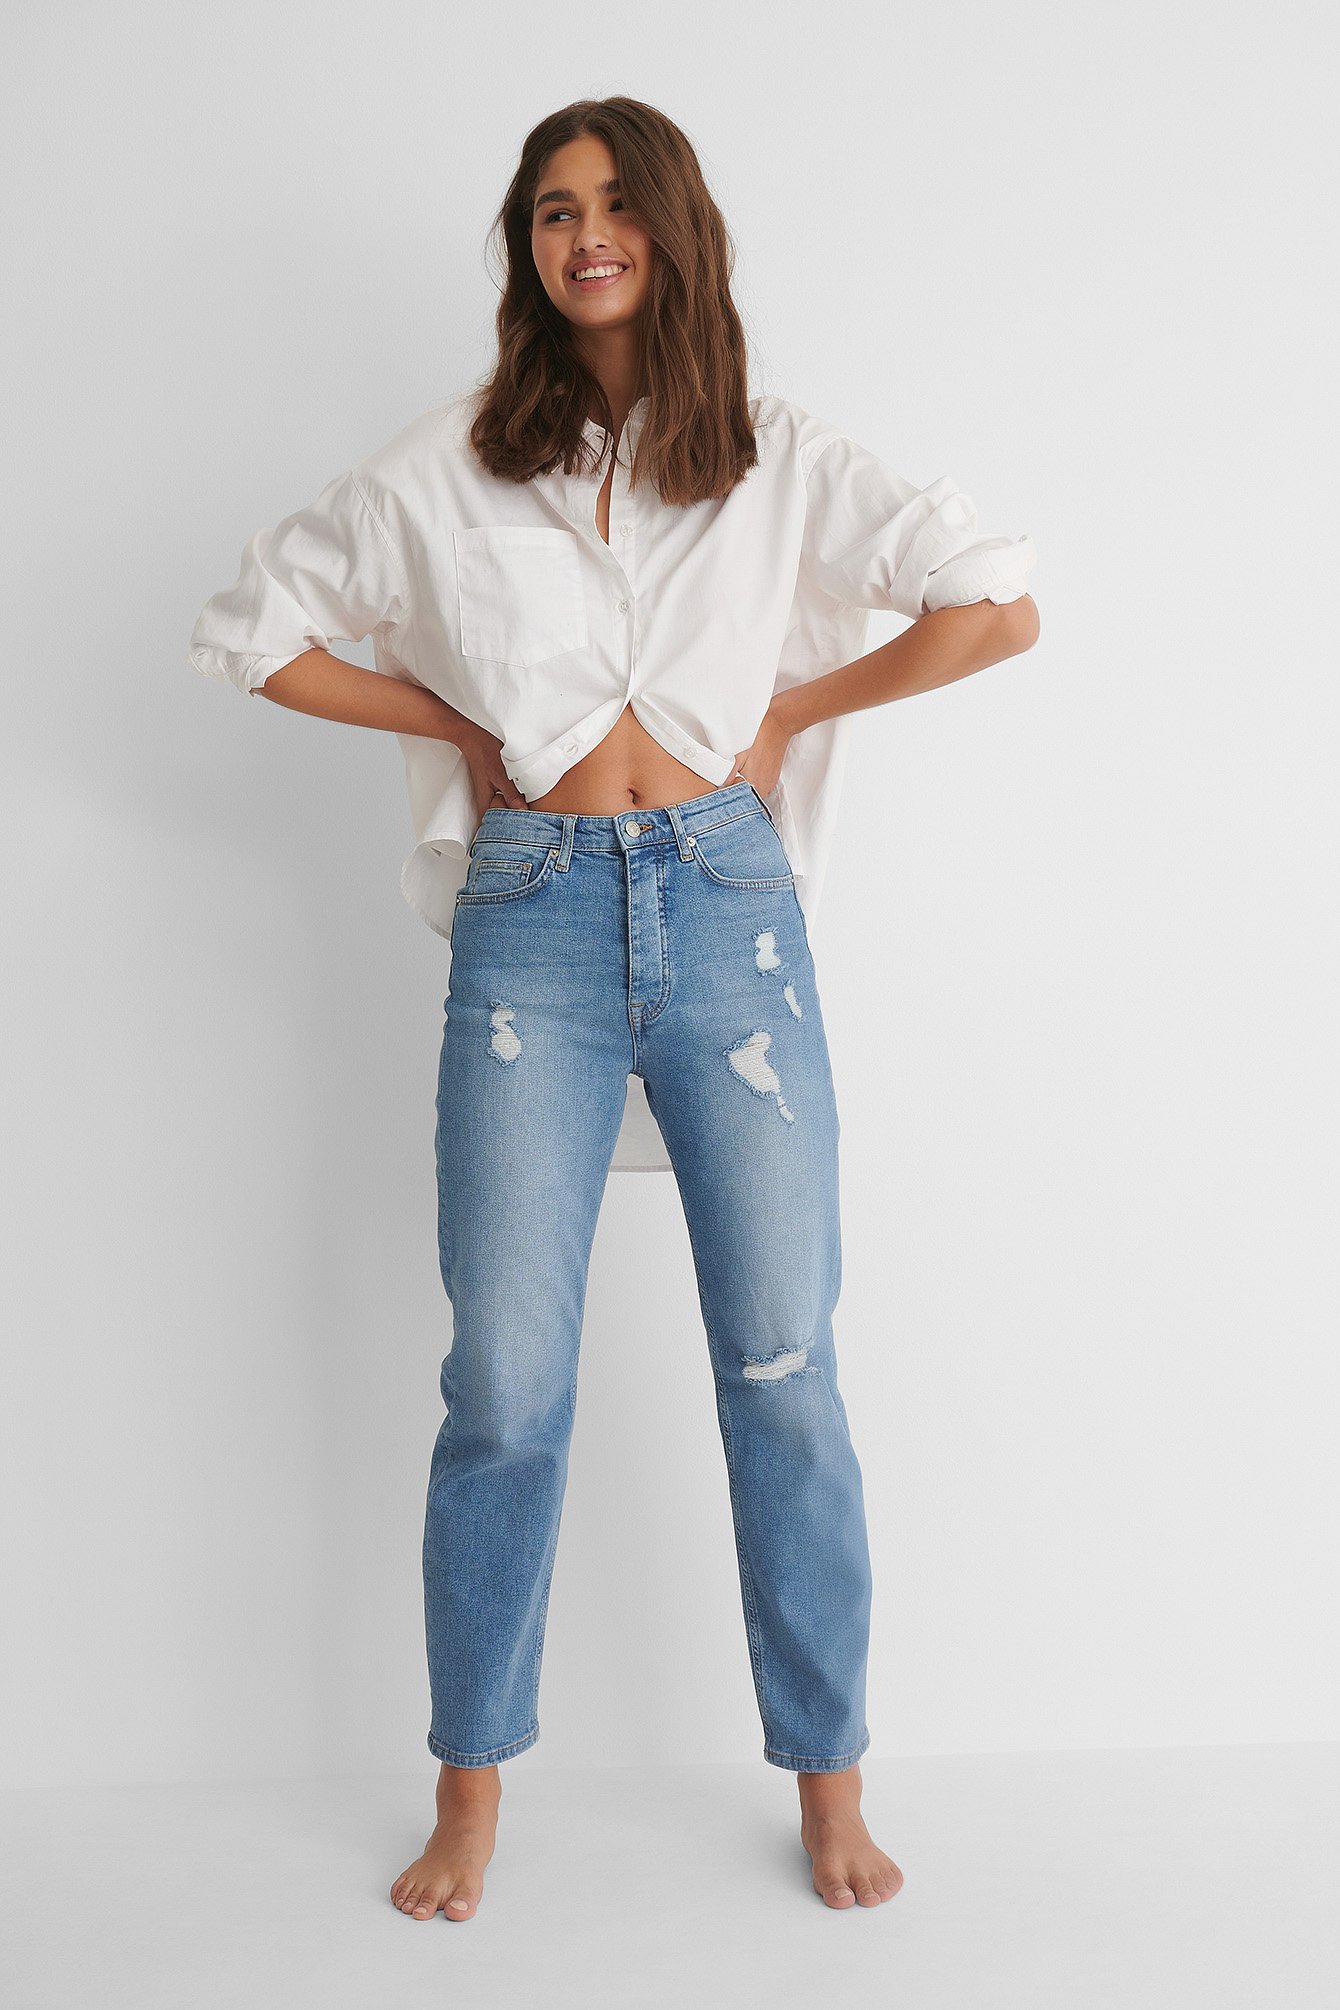 Straight High Waist Destroyed Jeans Outfit.